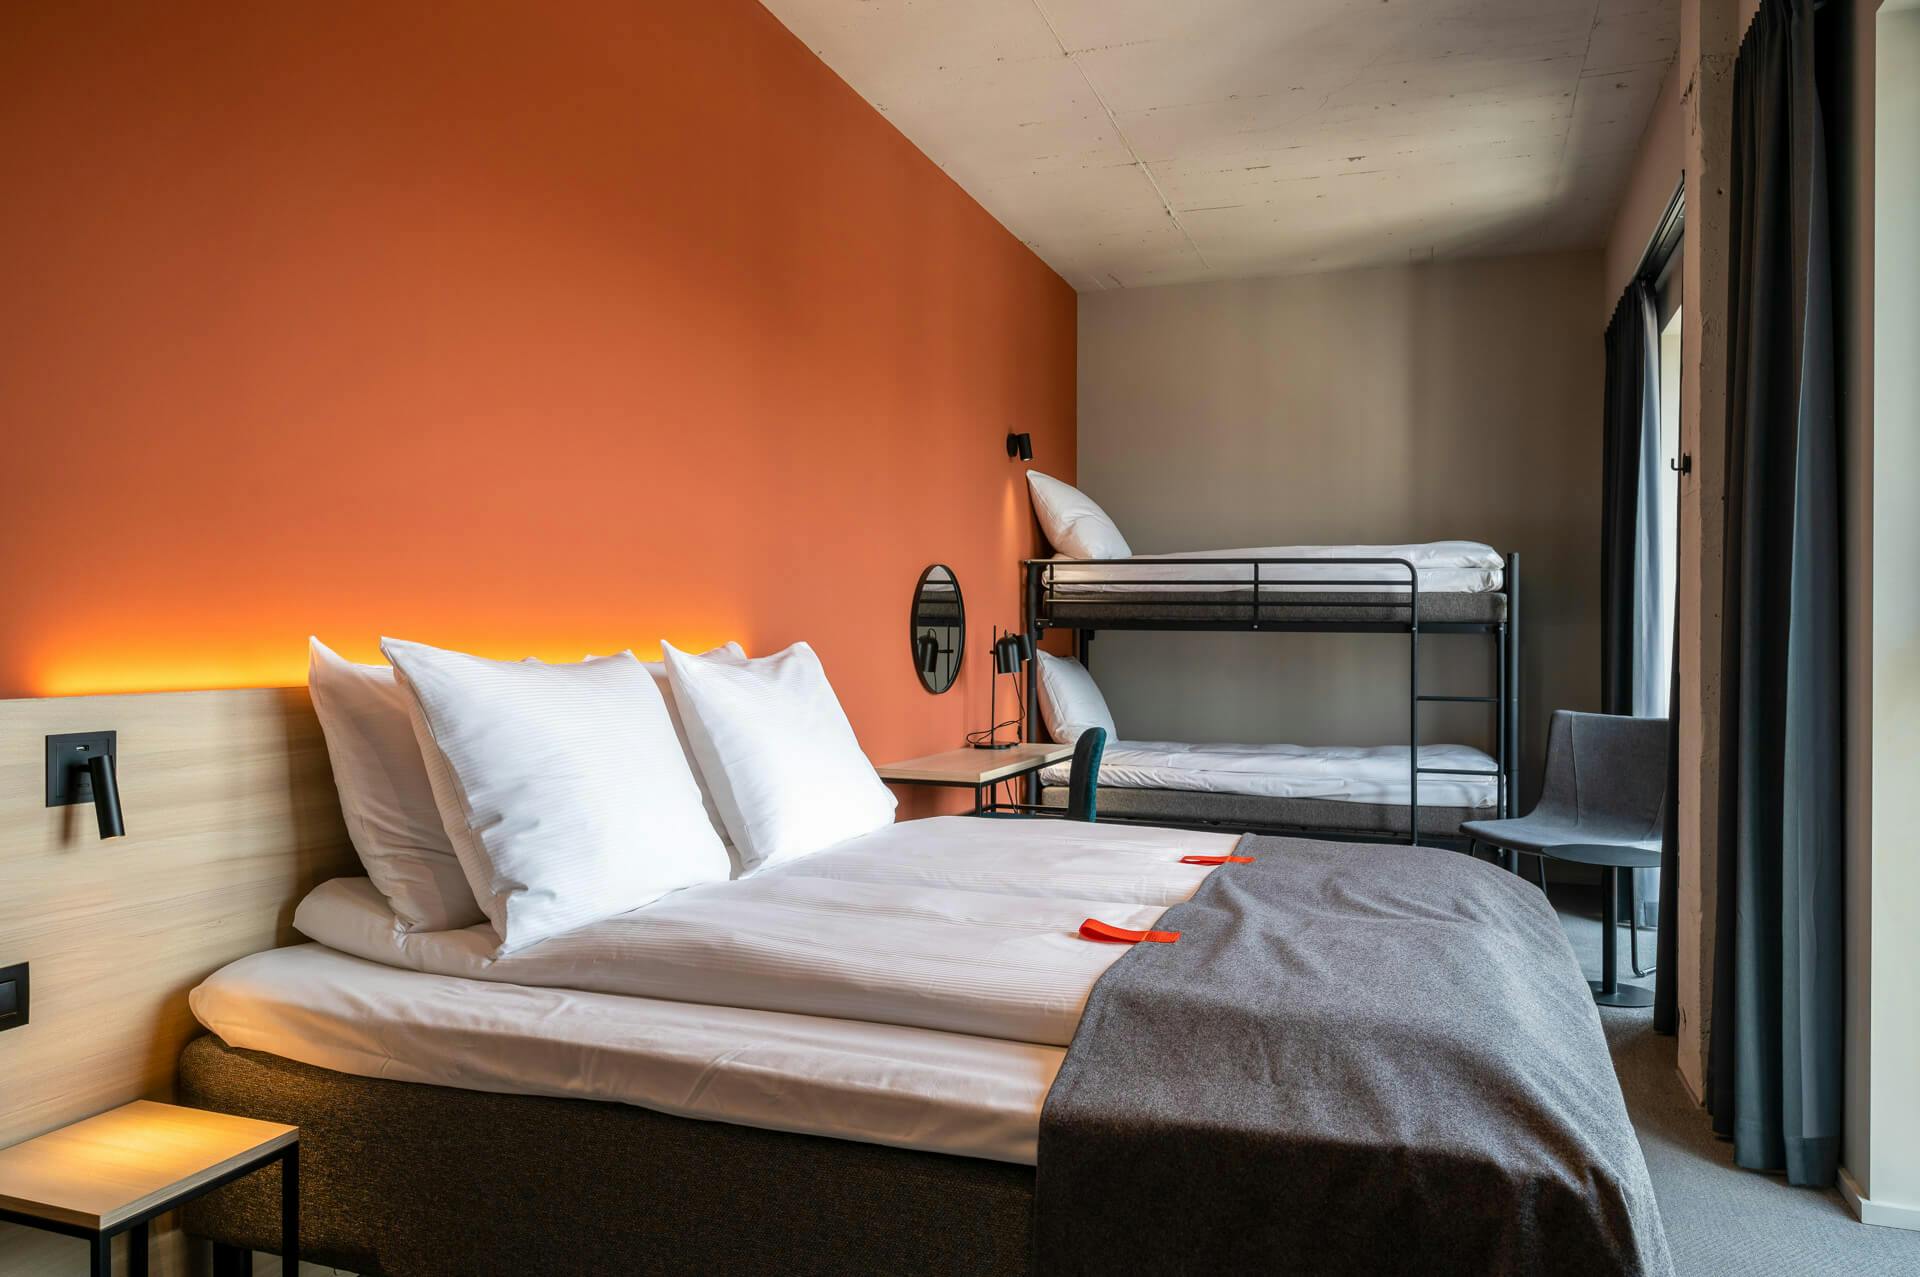 Double bed, bunk bed, chair, orange wall